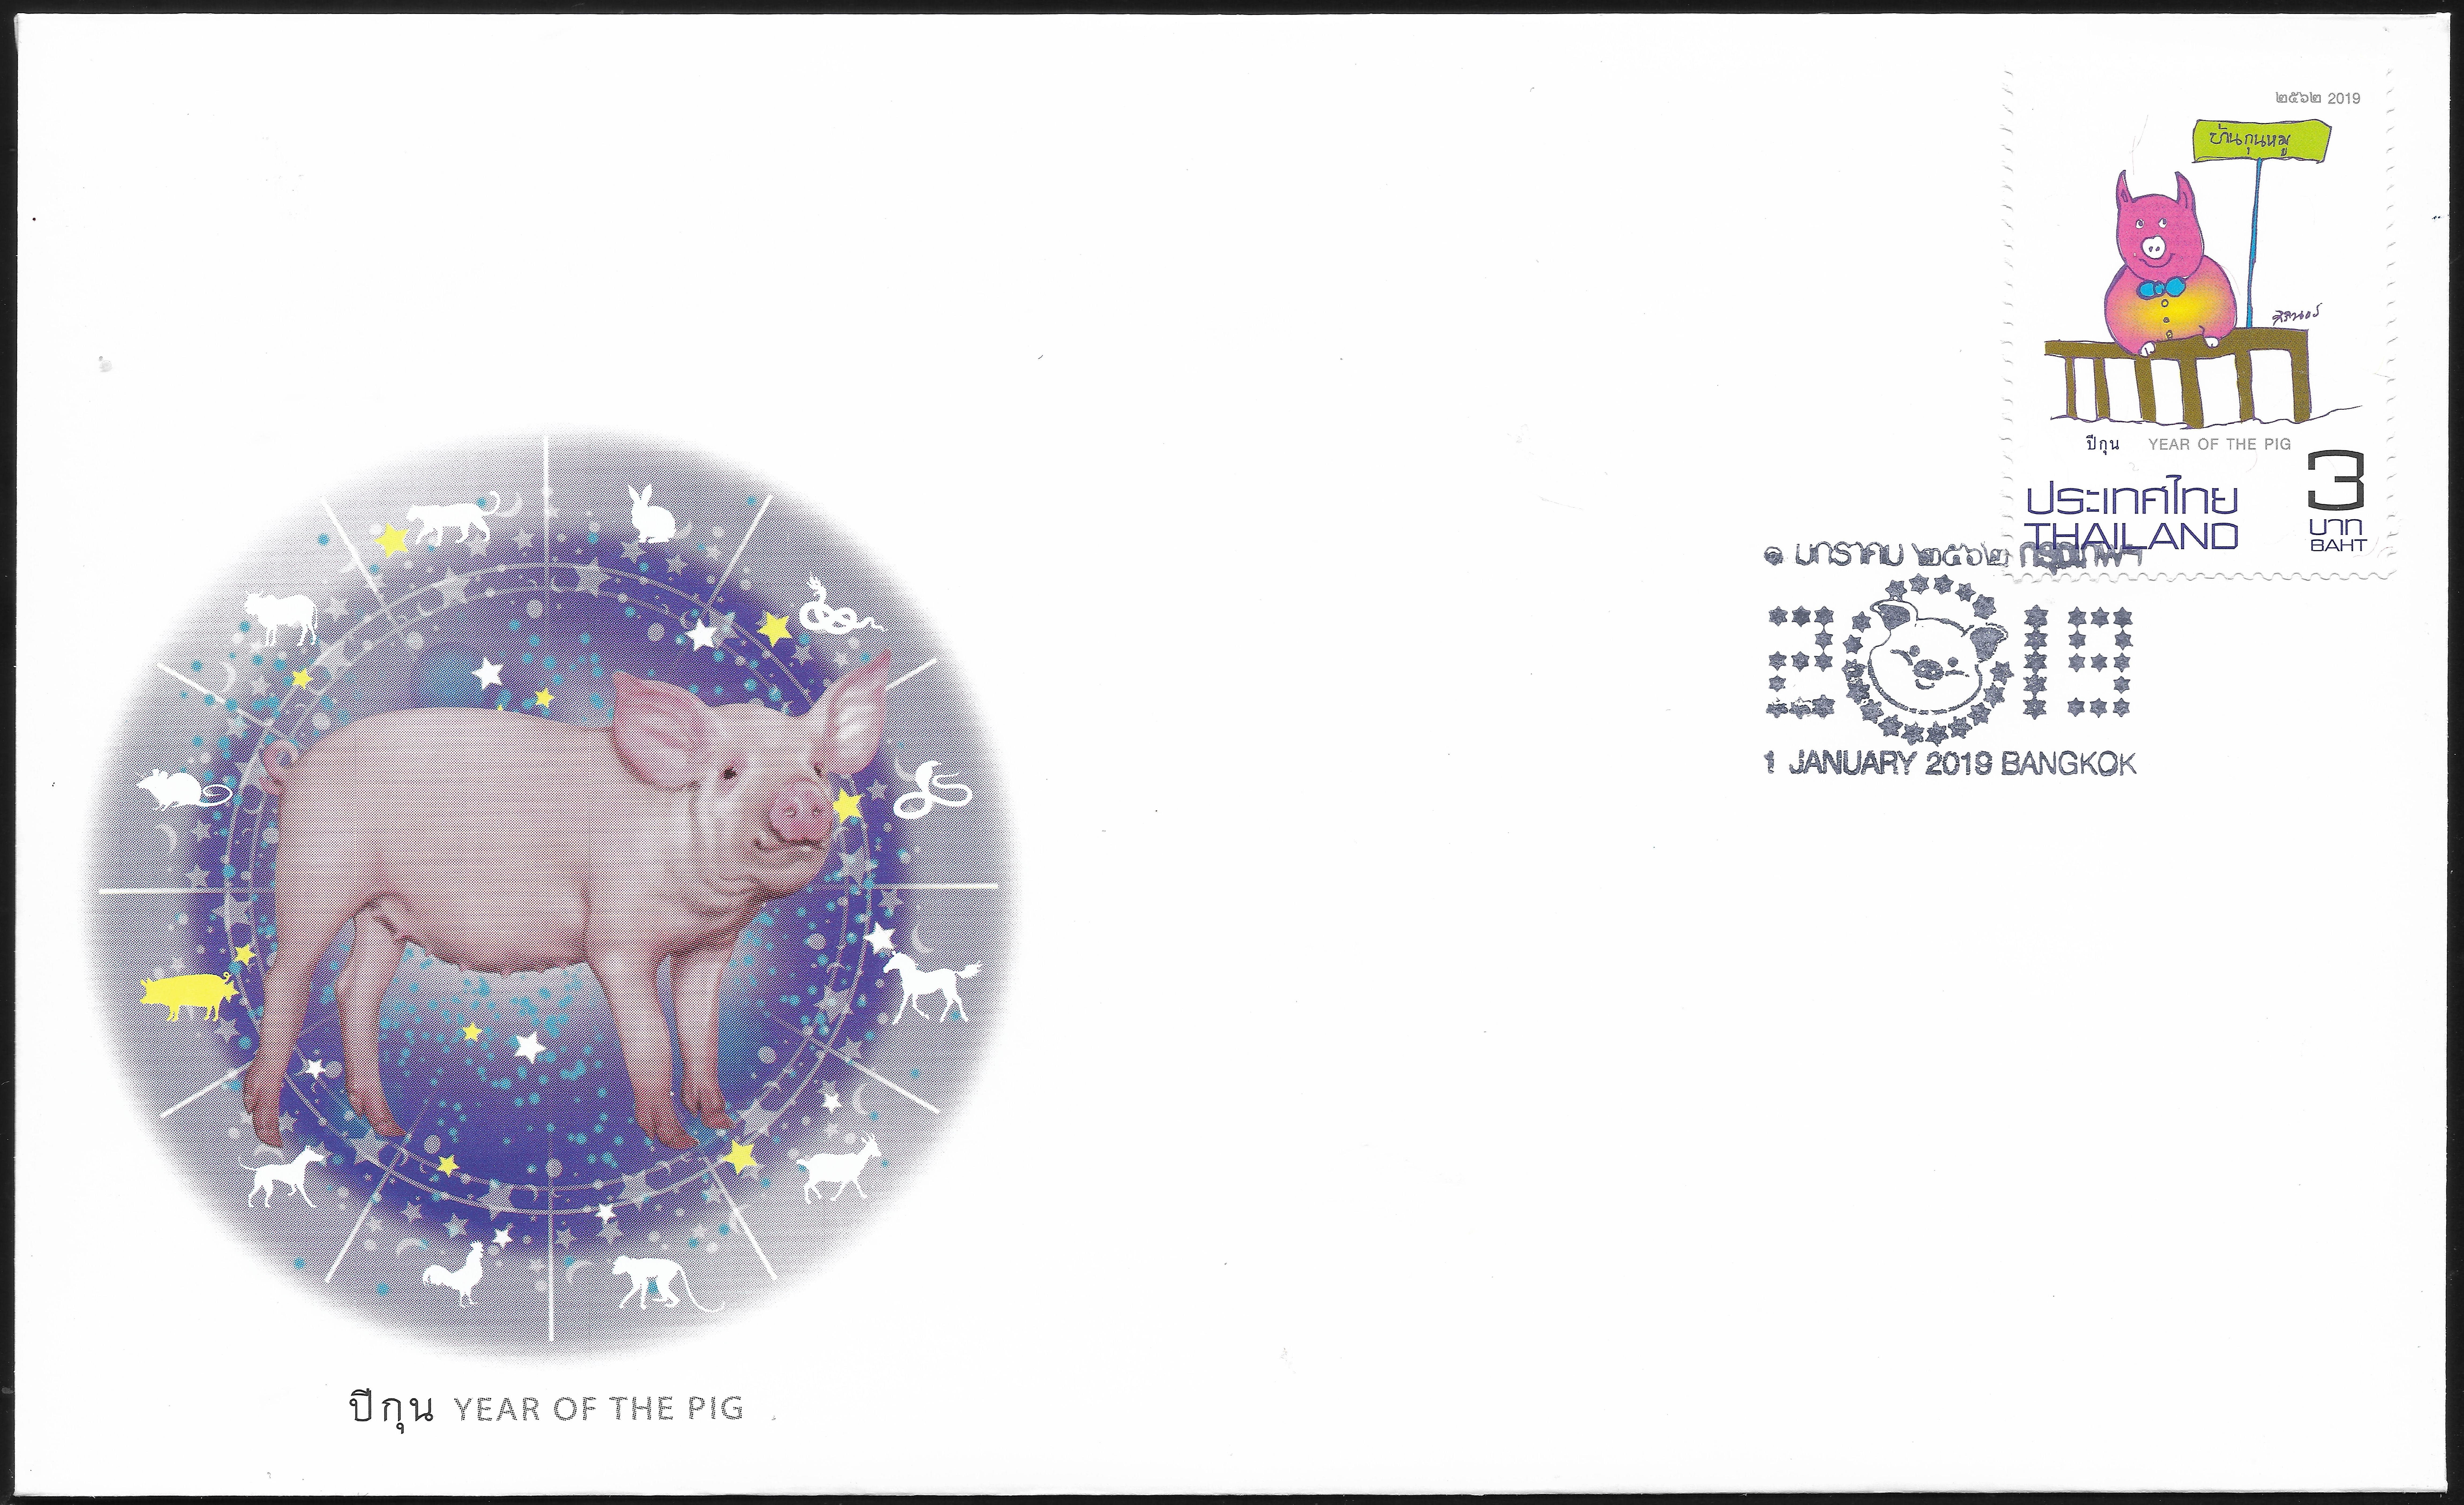 Thailand - Thailand Post #TH1062 (January 1, 2019) first day cover-front